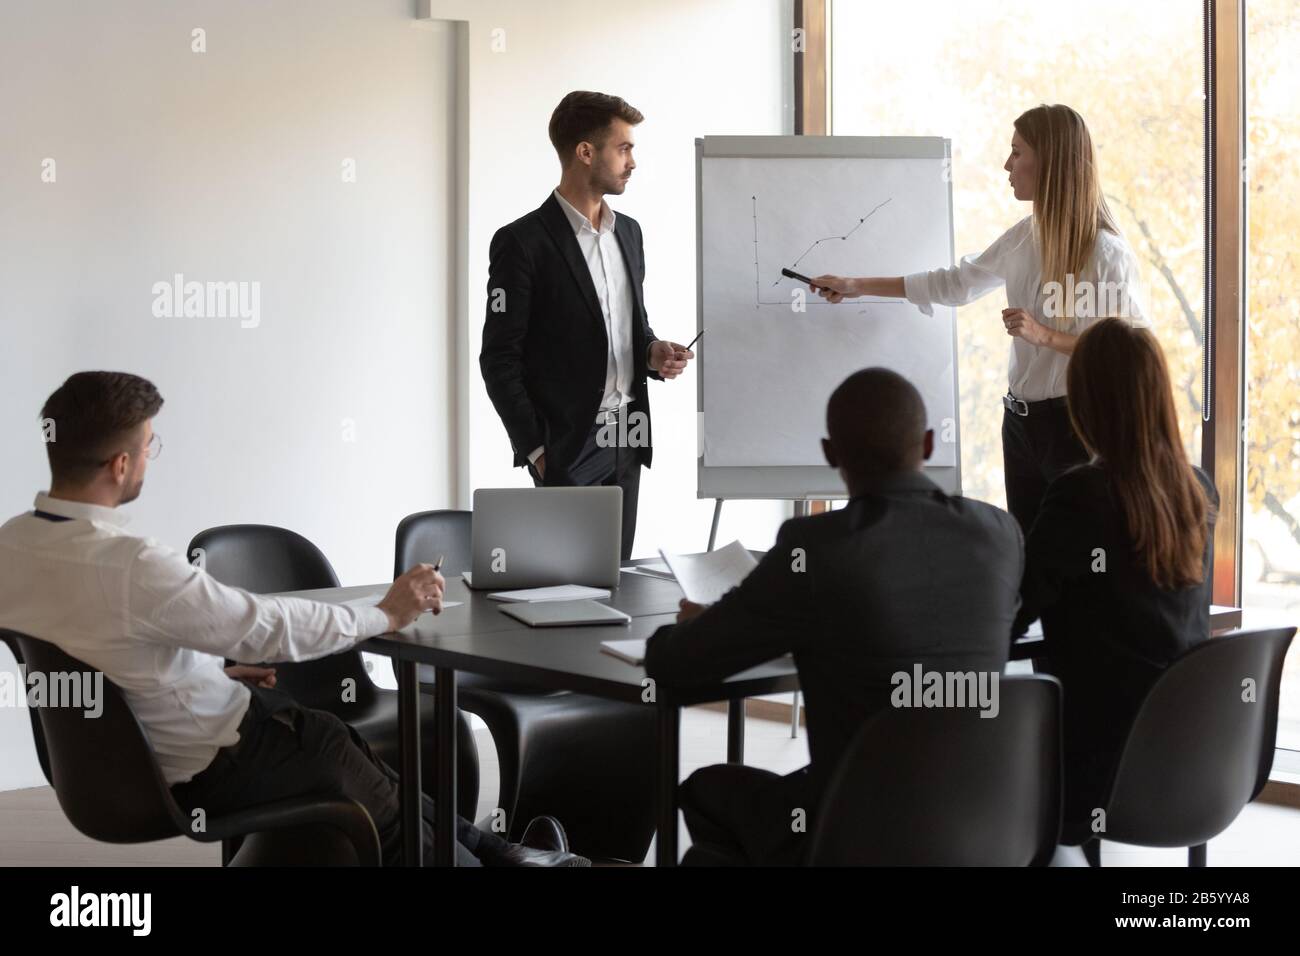 Multiracial team of employees listening to male and female presenters. Stock Photo